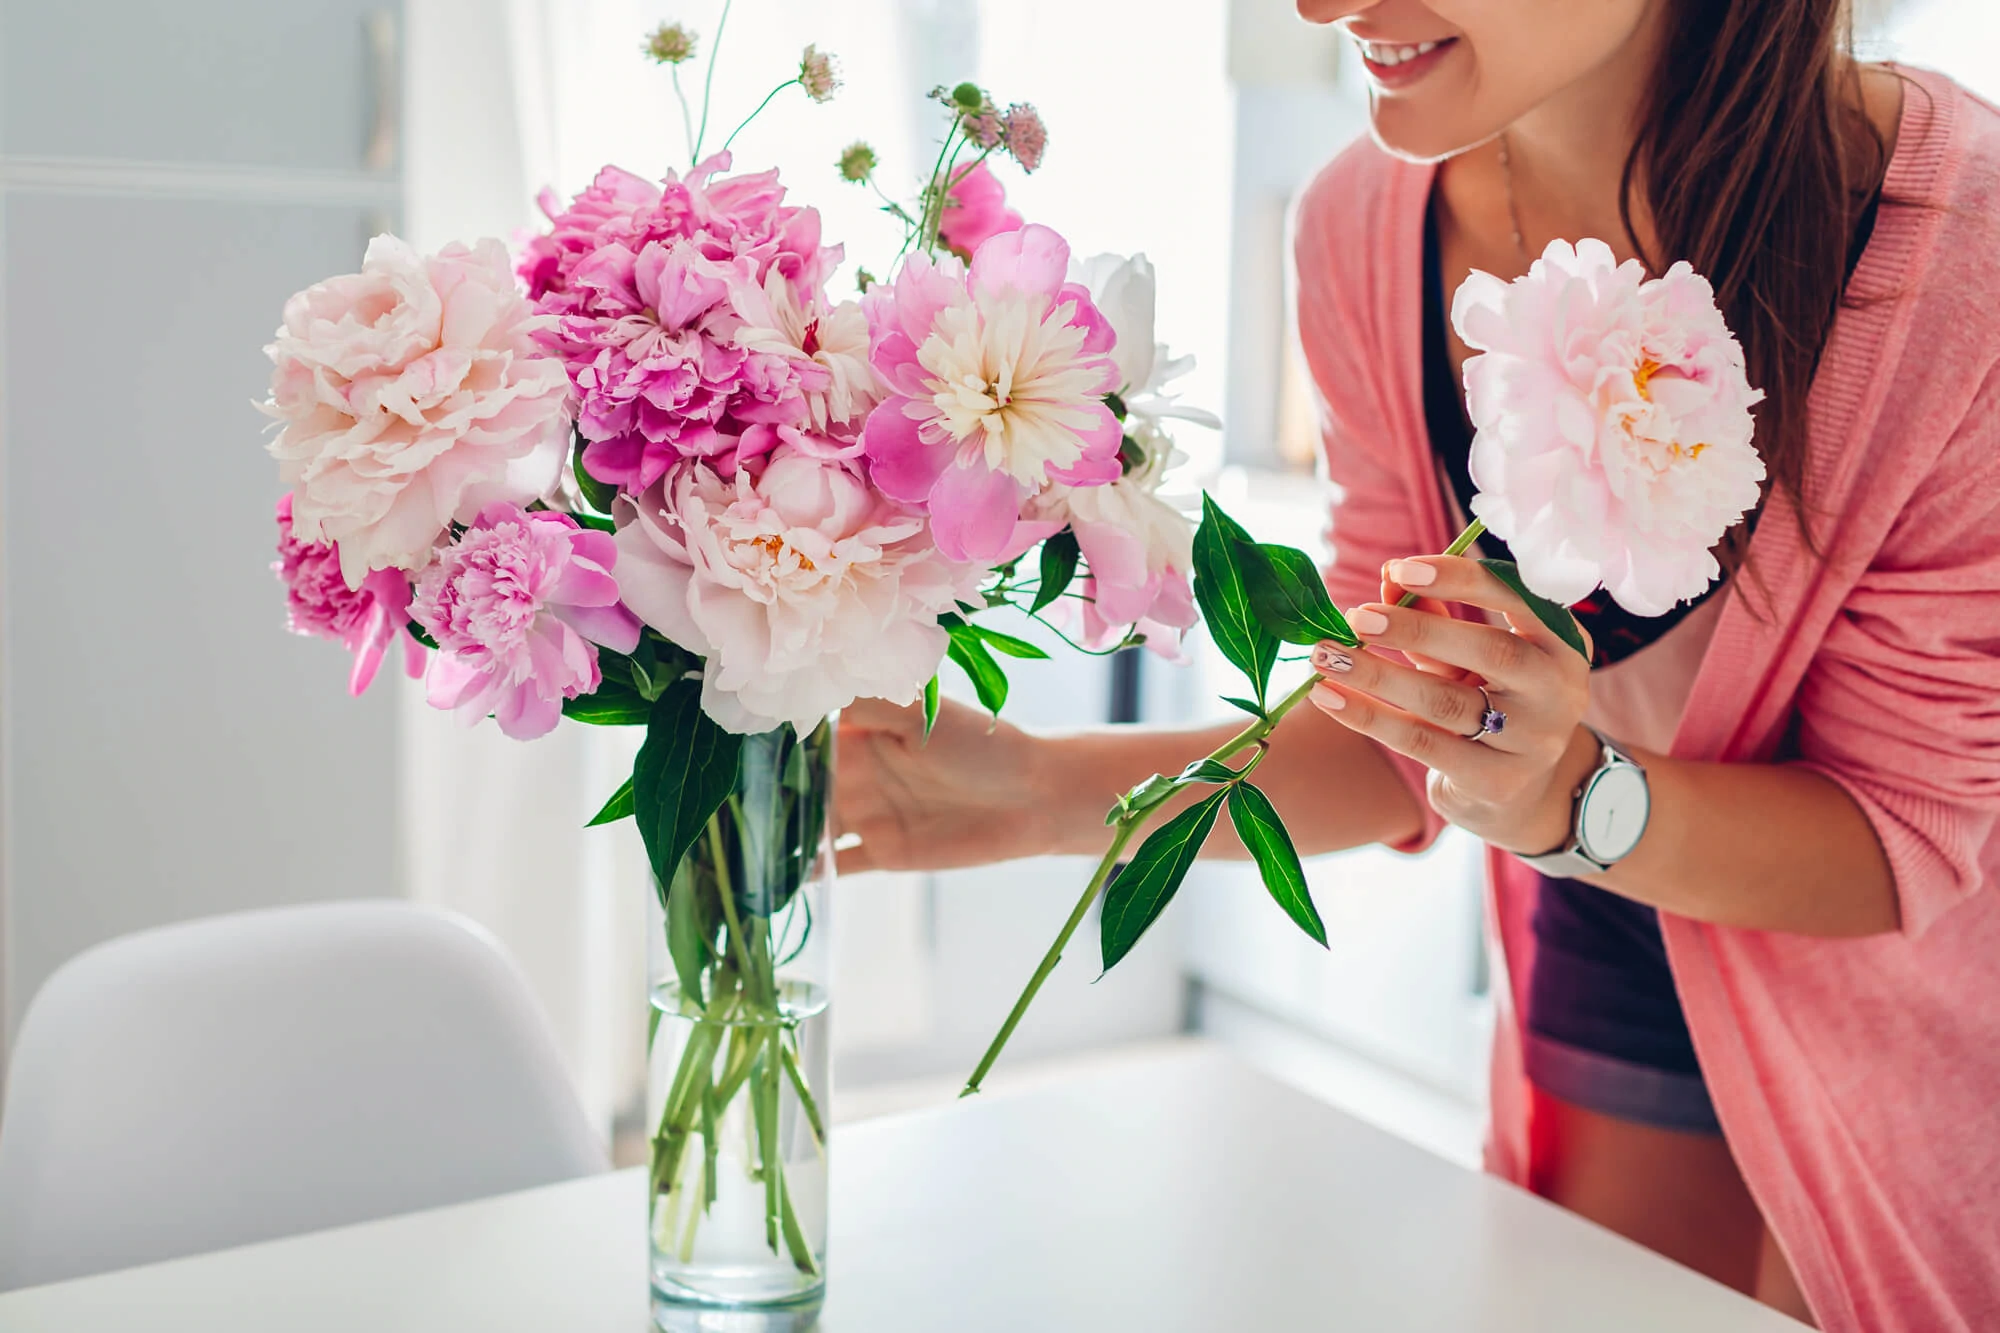 Lady Putting fresh Flowers In A Vase